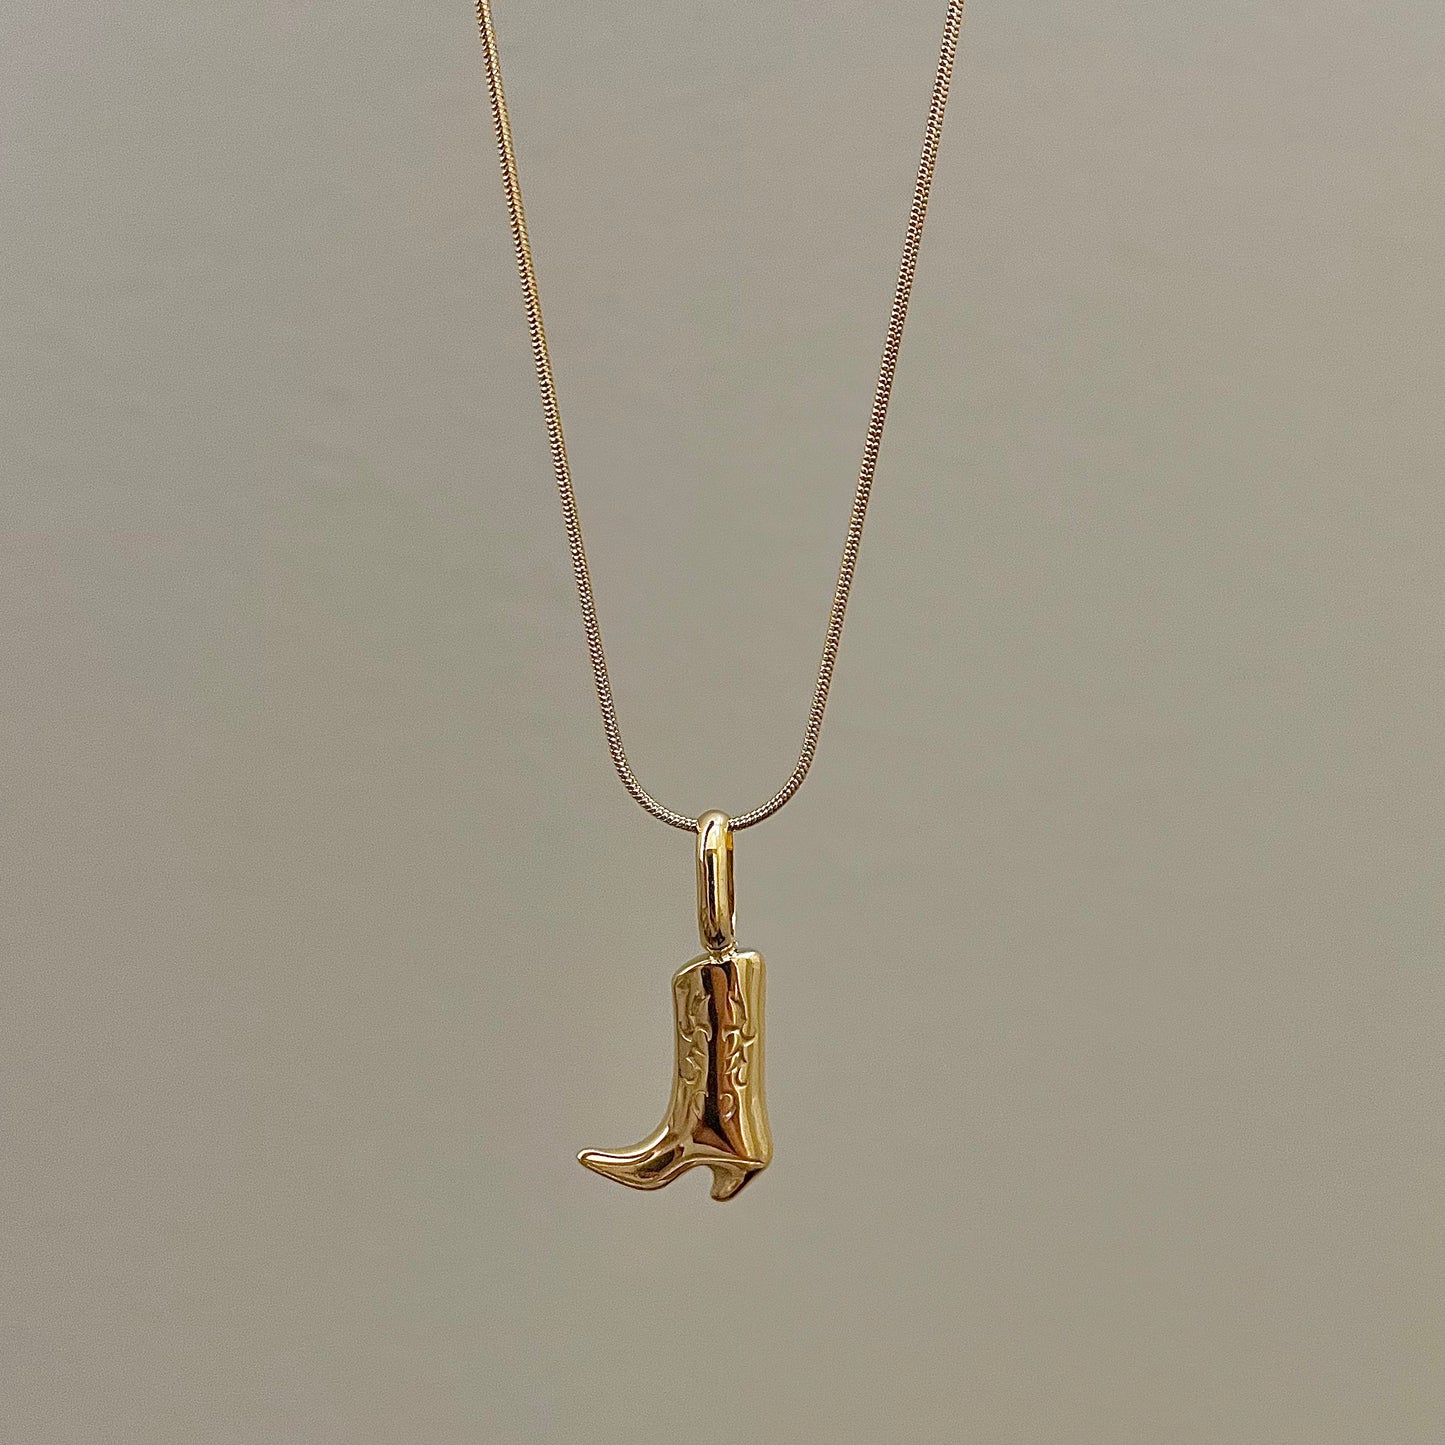 Lottie Boot Necklace- Gold